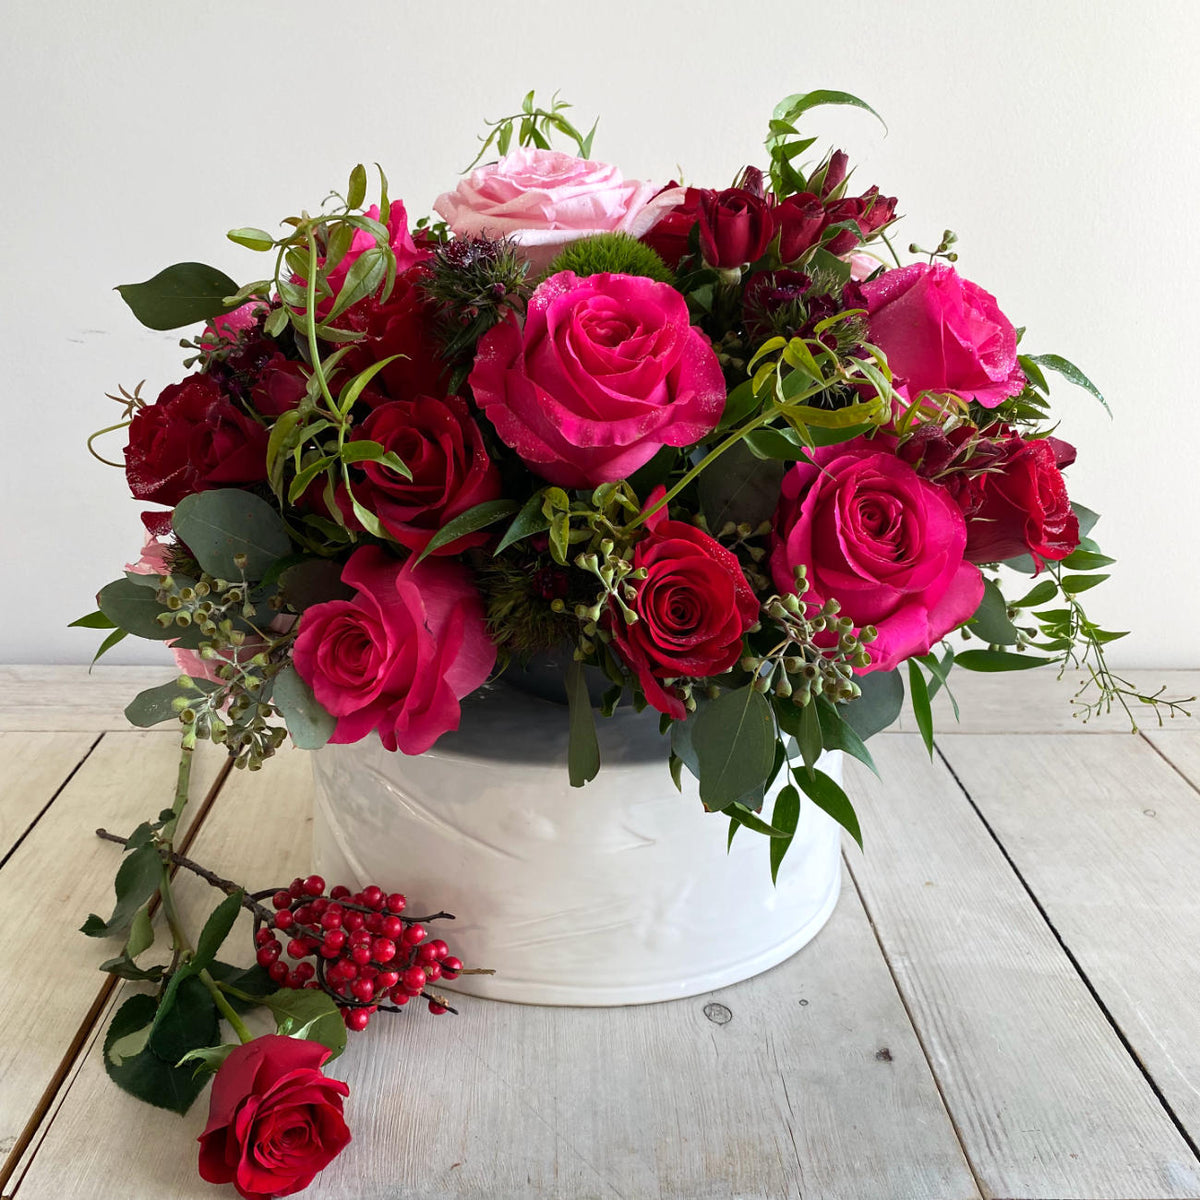 A Jaw-dropping floral design that showcases the pure beauty of a rose. A stunning arrangement of paved mixed roses and greens. Featuring red hearts roses. Pink Floyd Roses and romantic O&#39;Hara garden roses. Topped with a touch of glitter.